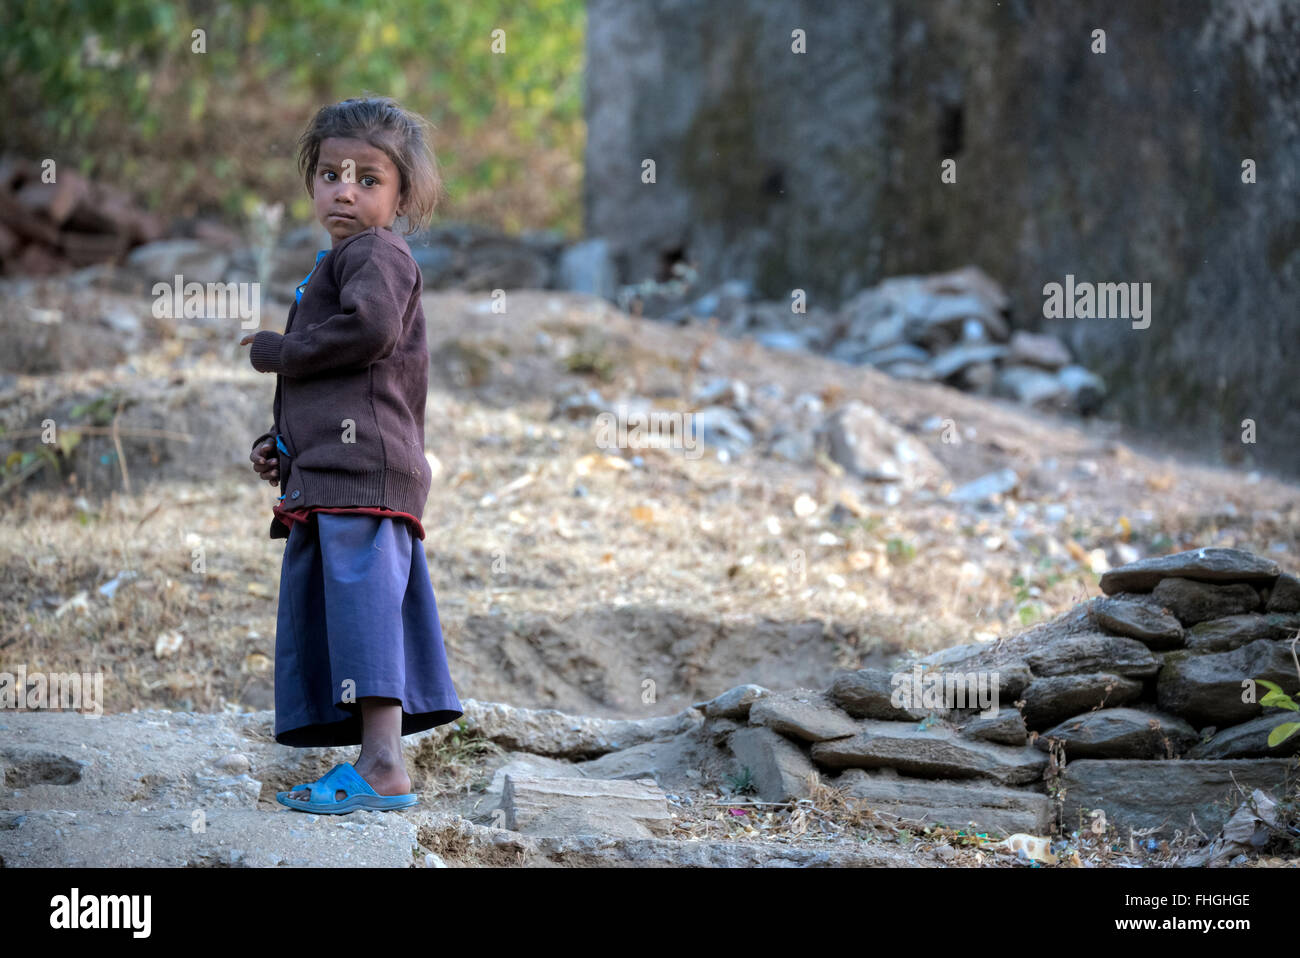 young girl in rural Rajasthan, India Stock Photo